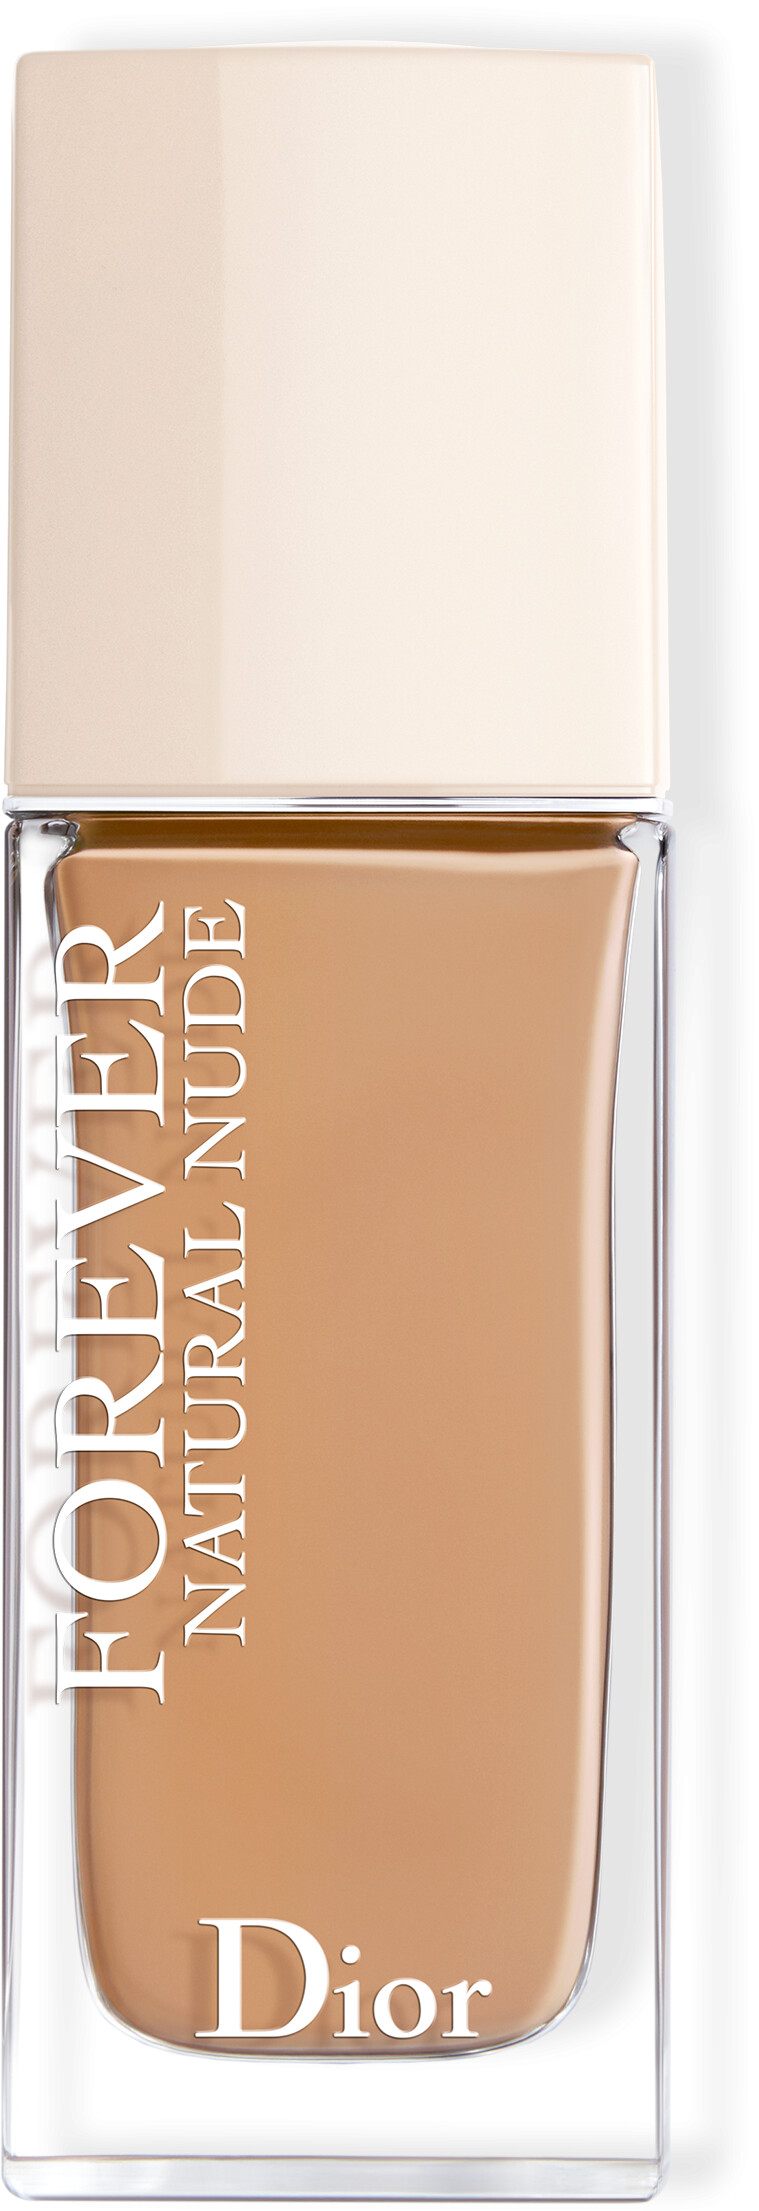 DIOR Forever Natural Nude Foundation 30ml 4N - Neutral